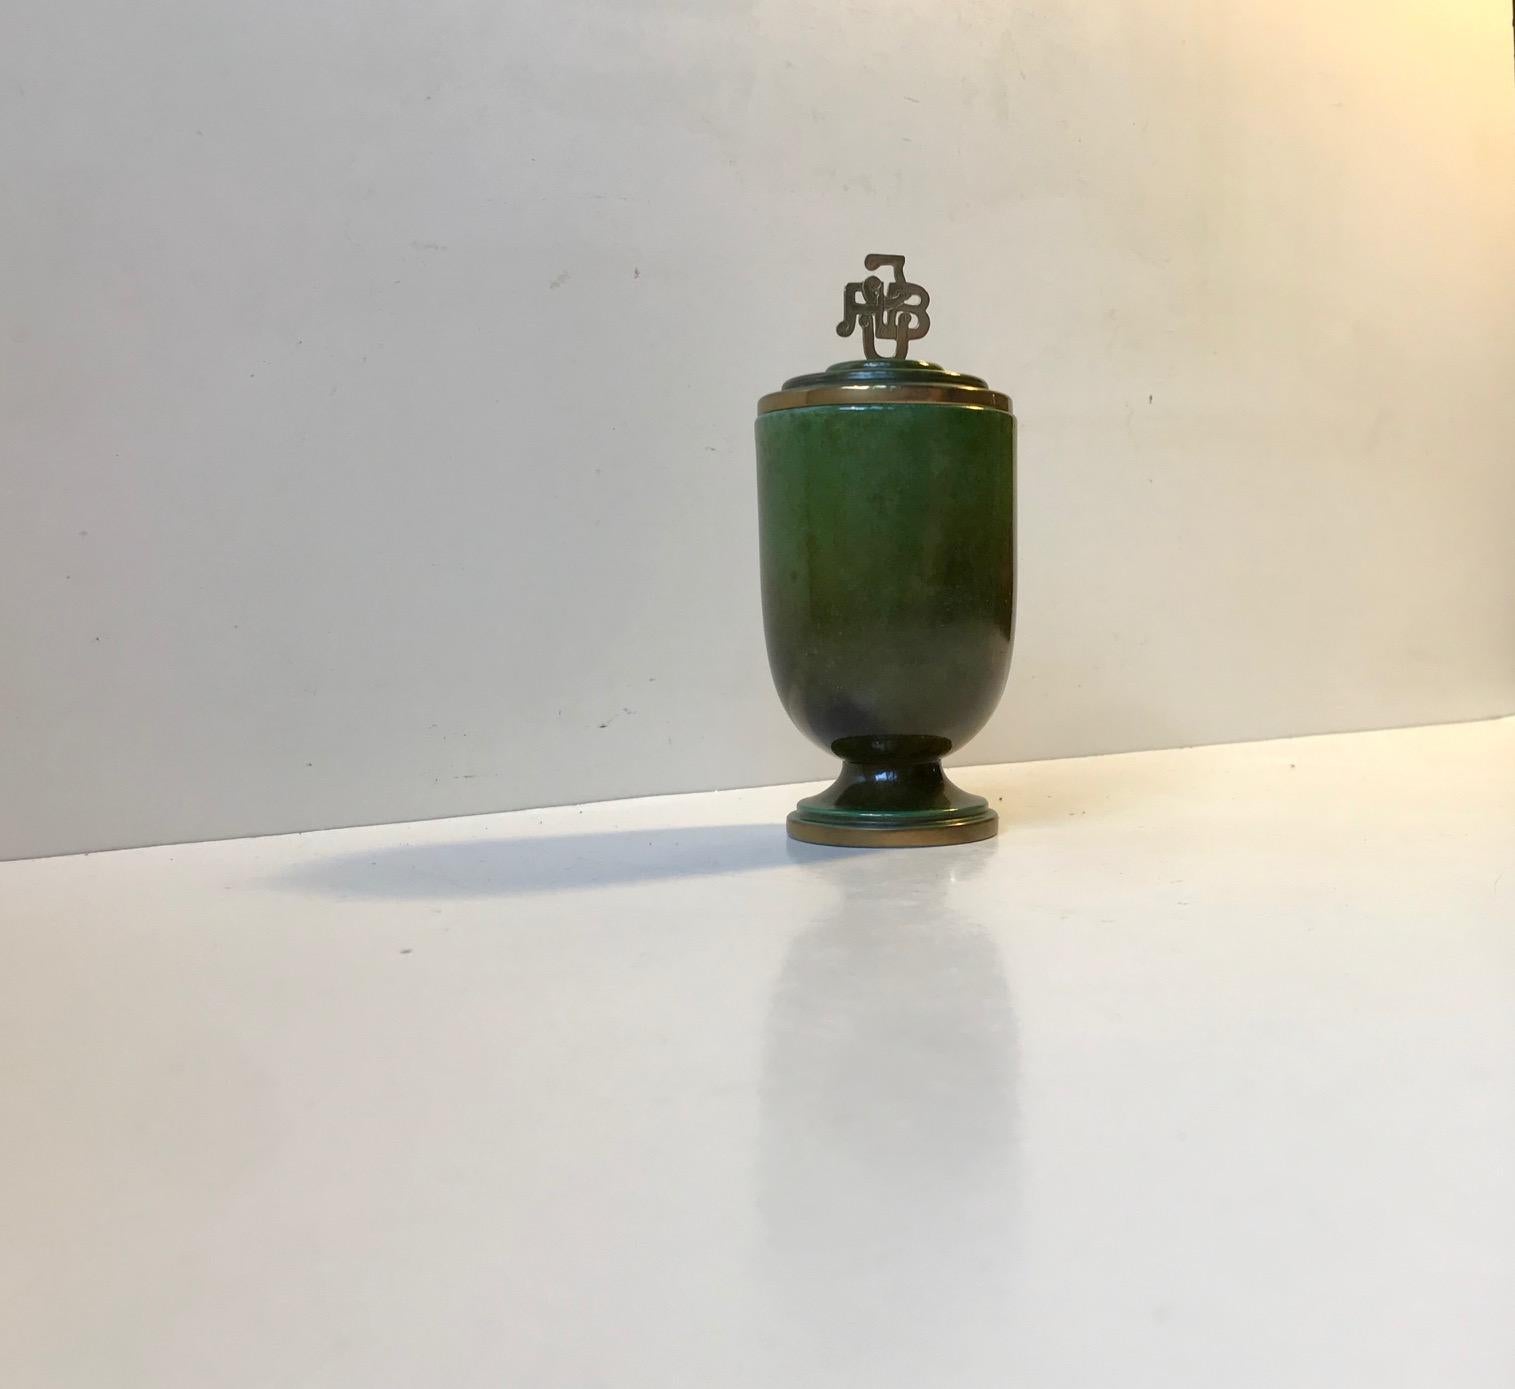 Originally presented as a trophy to an amateur boxer in 1949 this green verdigris patinated jug is actually a cigarette holder/dispenser. It can contain in excess of 20 filter cigarettes. It has the emblem of JYSK amatør bokse union (The amateur